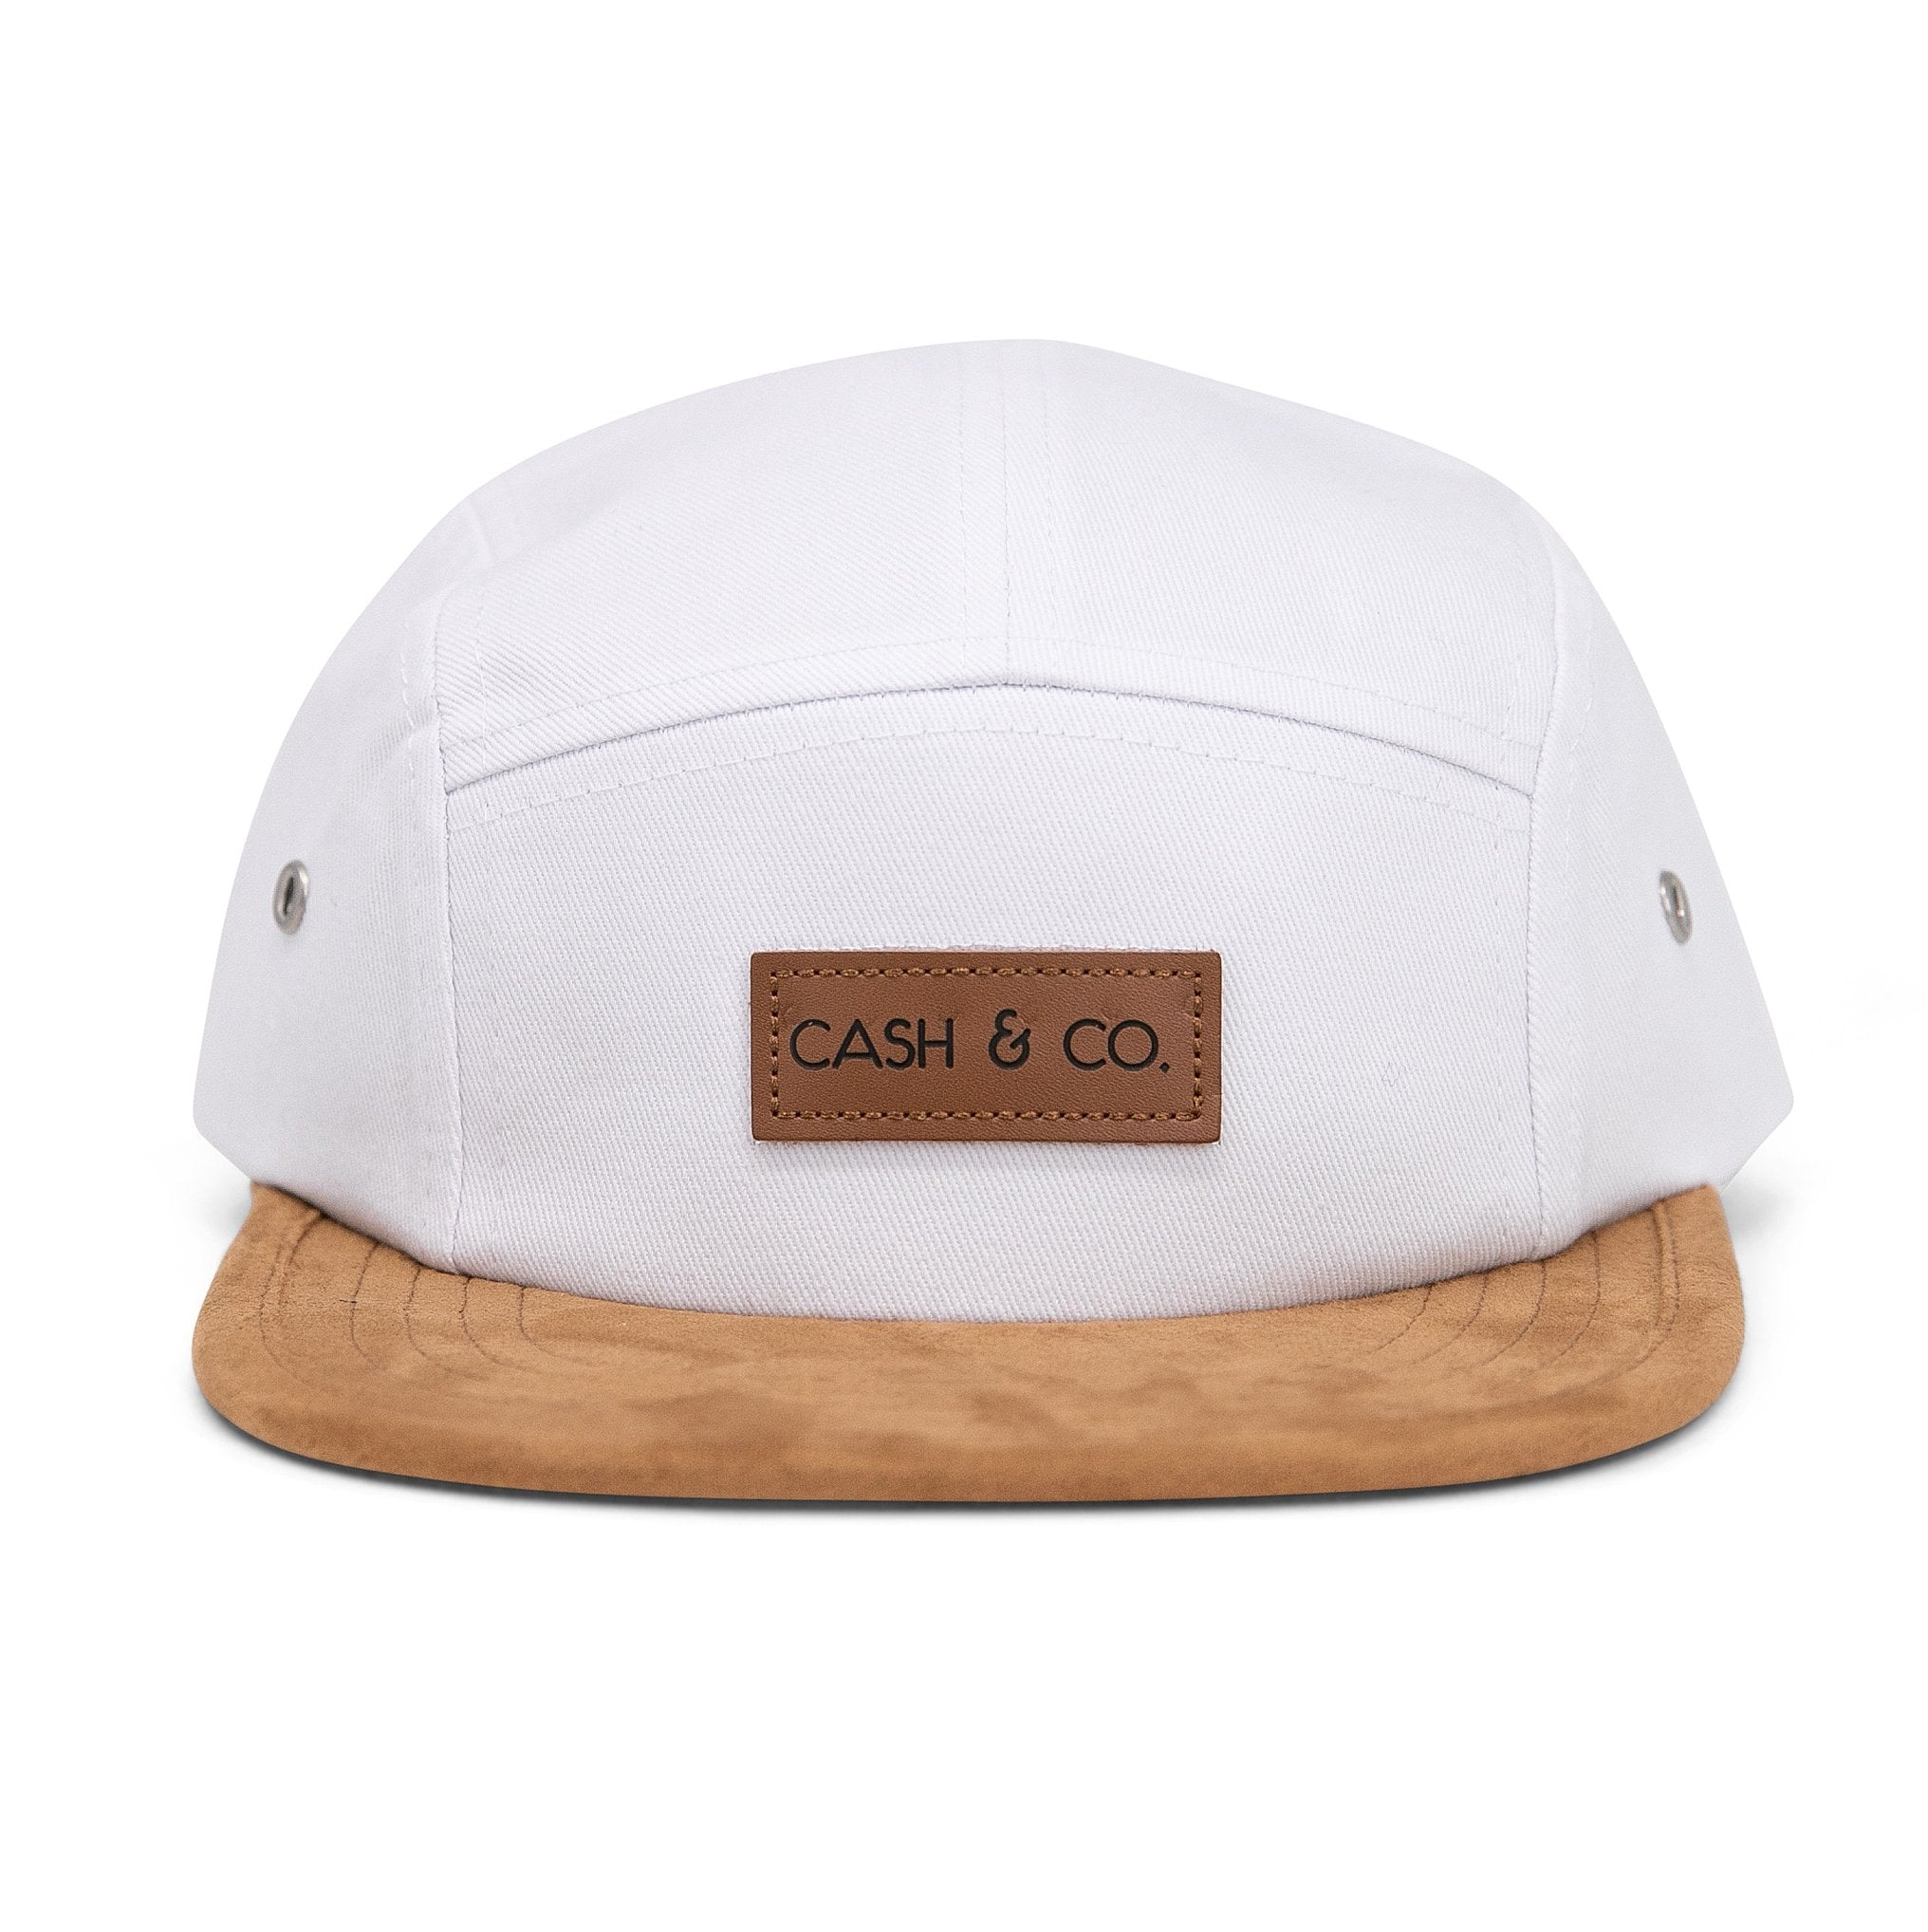 Hat - Sugar cash and co toddler boys hats white with tan brim and leather cash and co. 